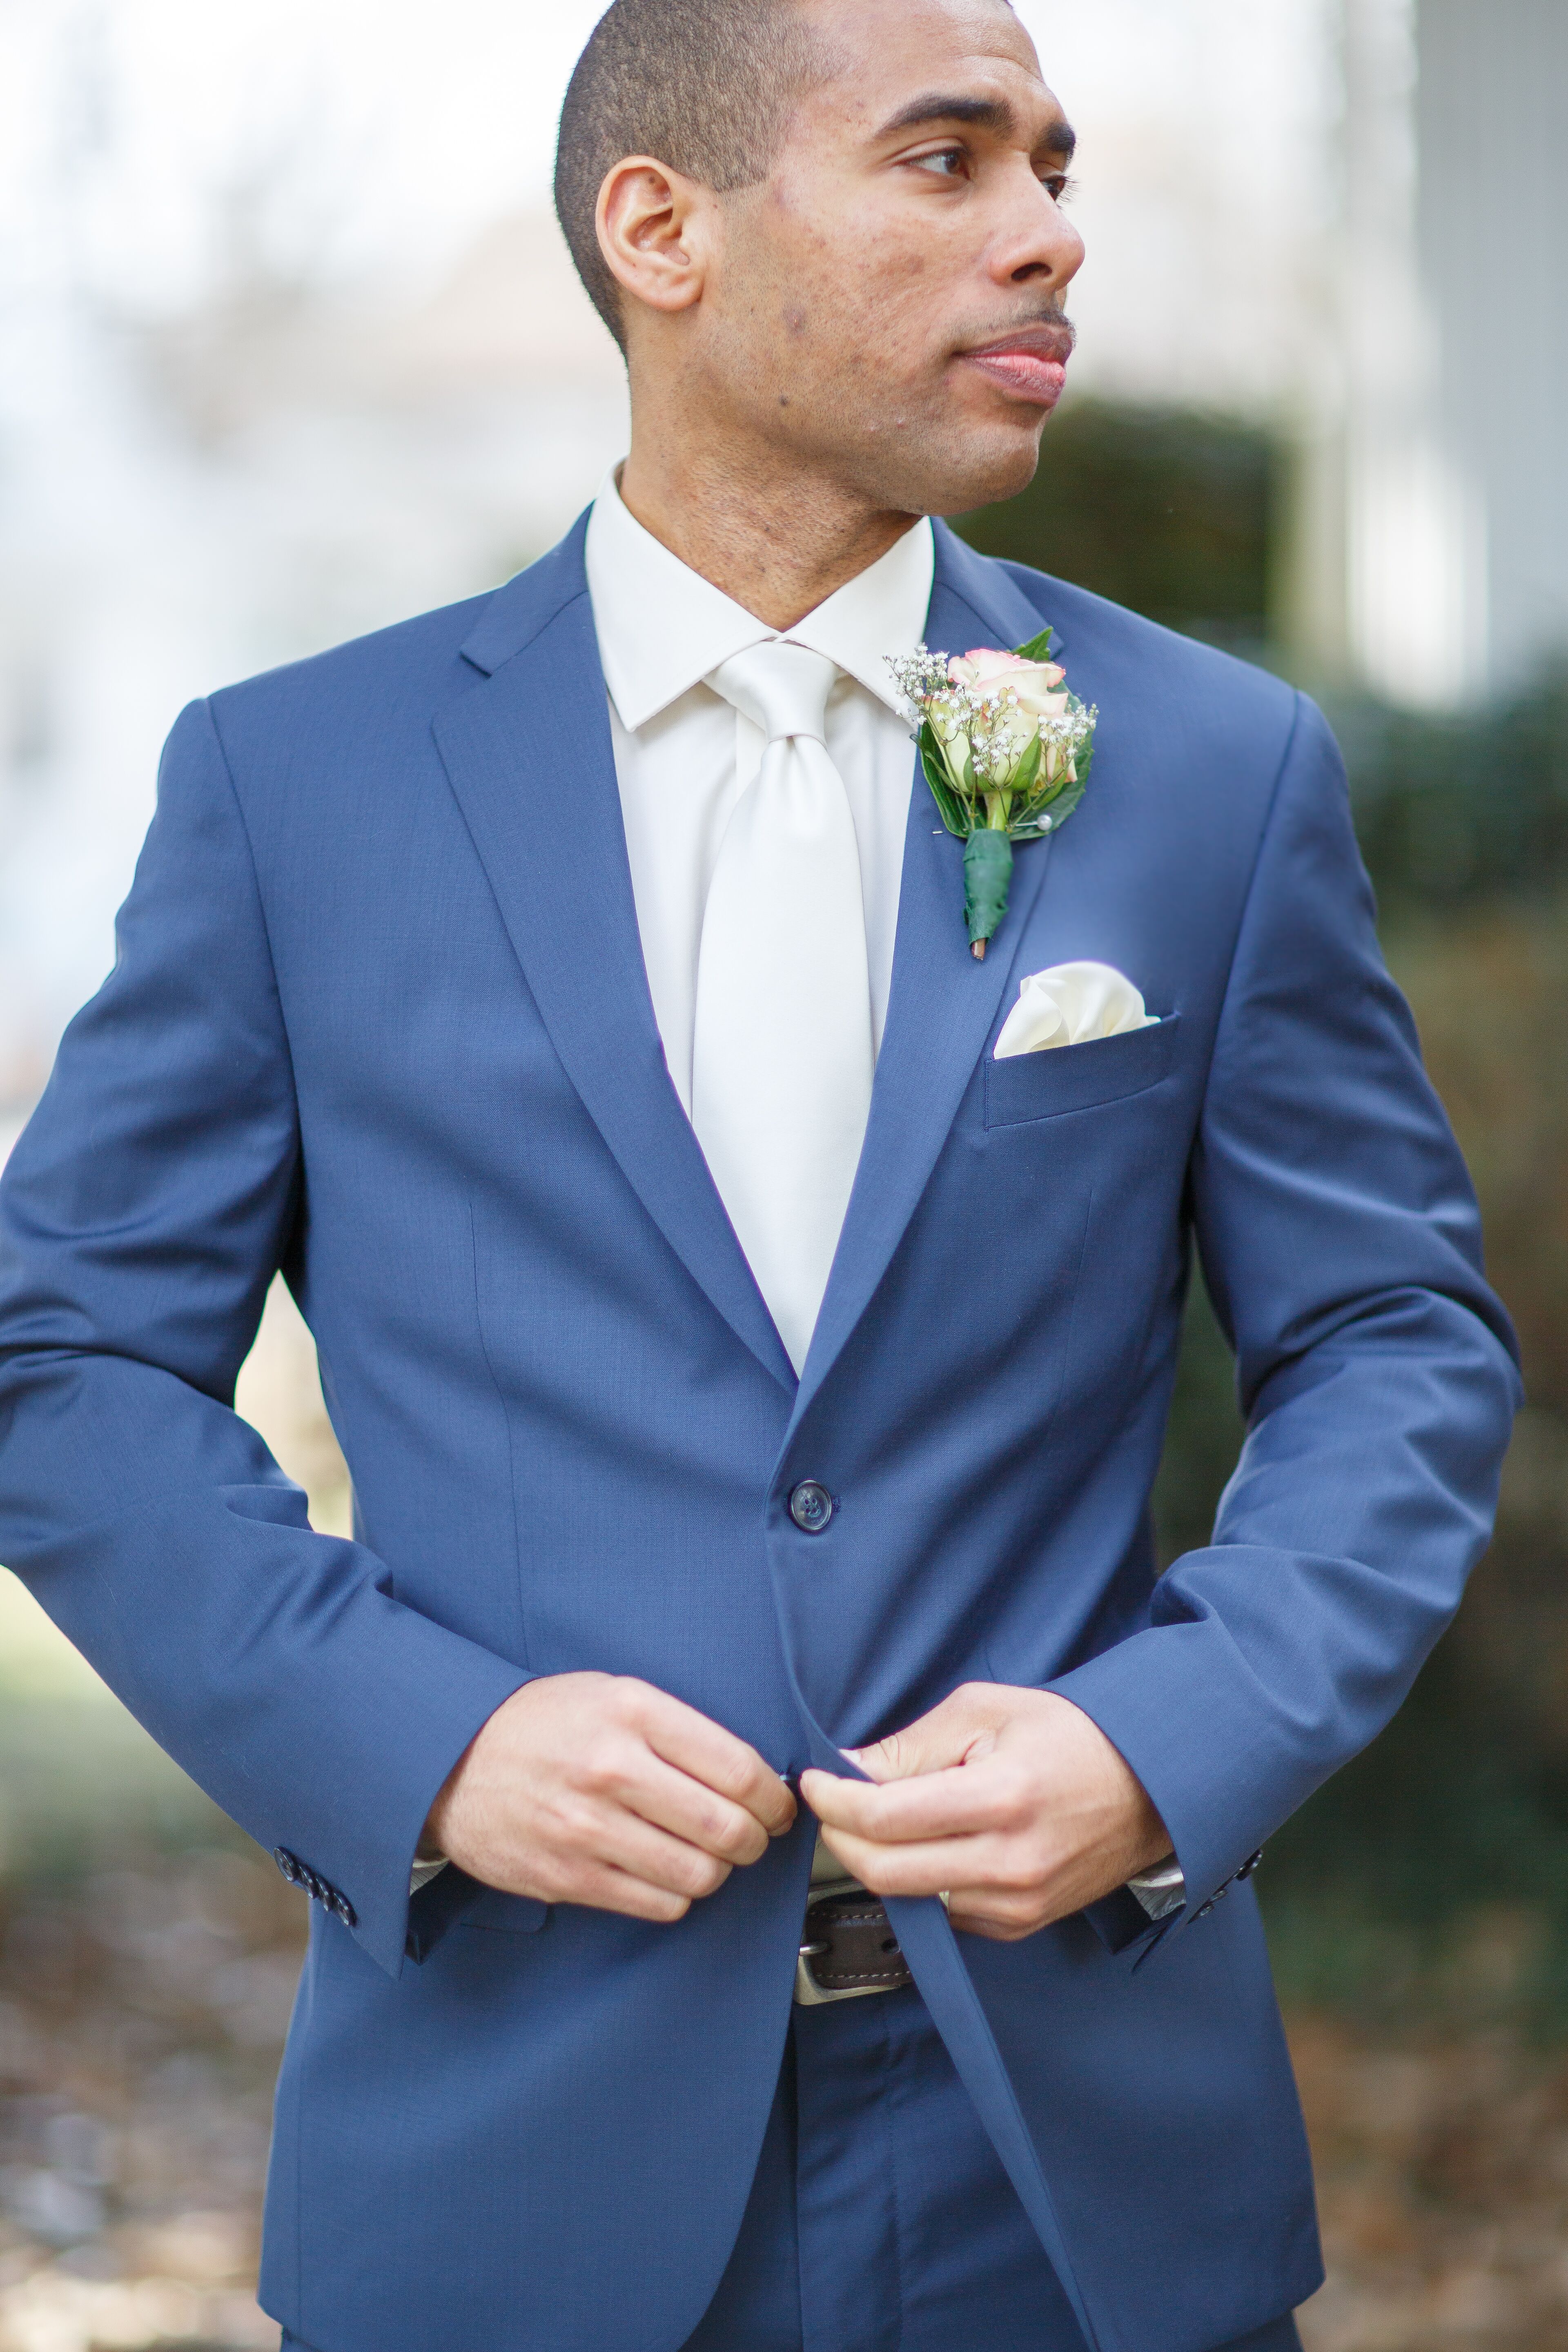 Navy Blue Suit, Pink Tie, Groom Style, Classic New England, Preppy ...